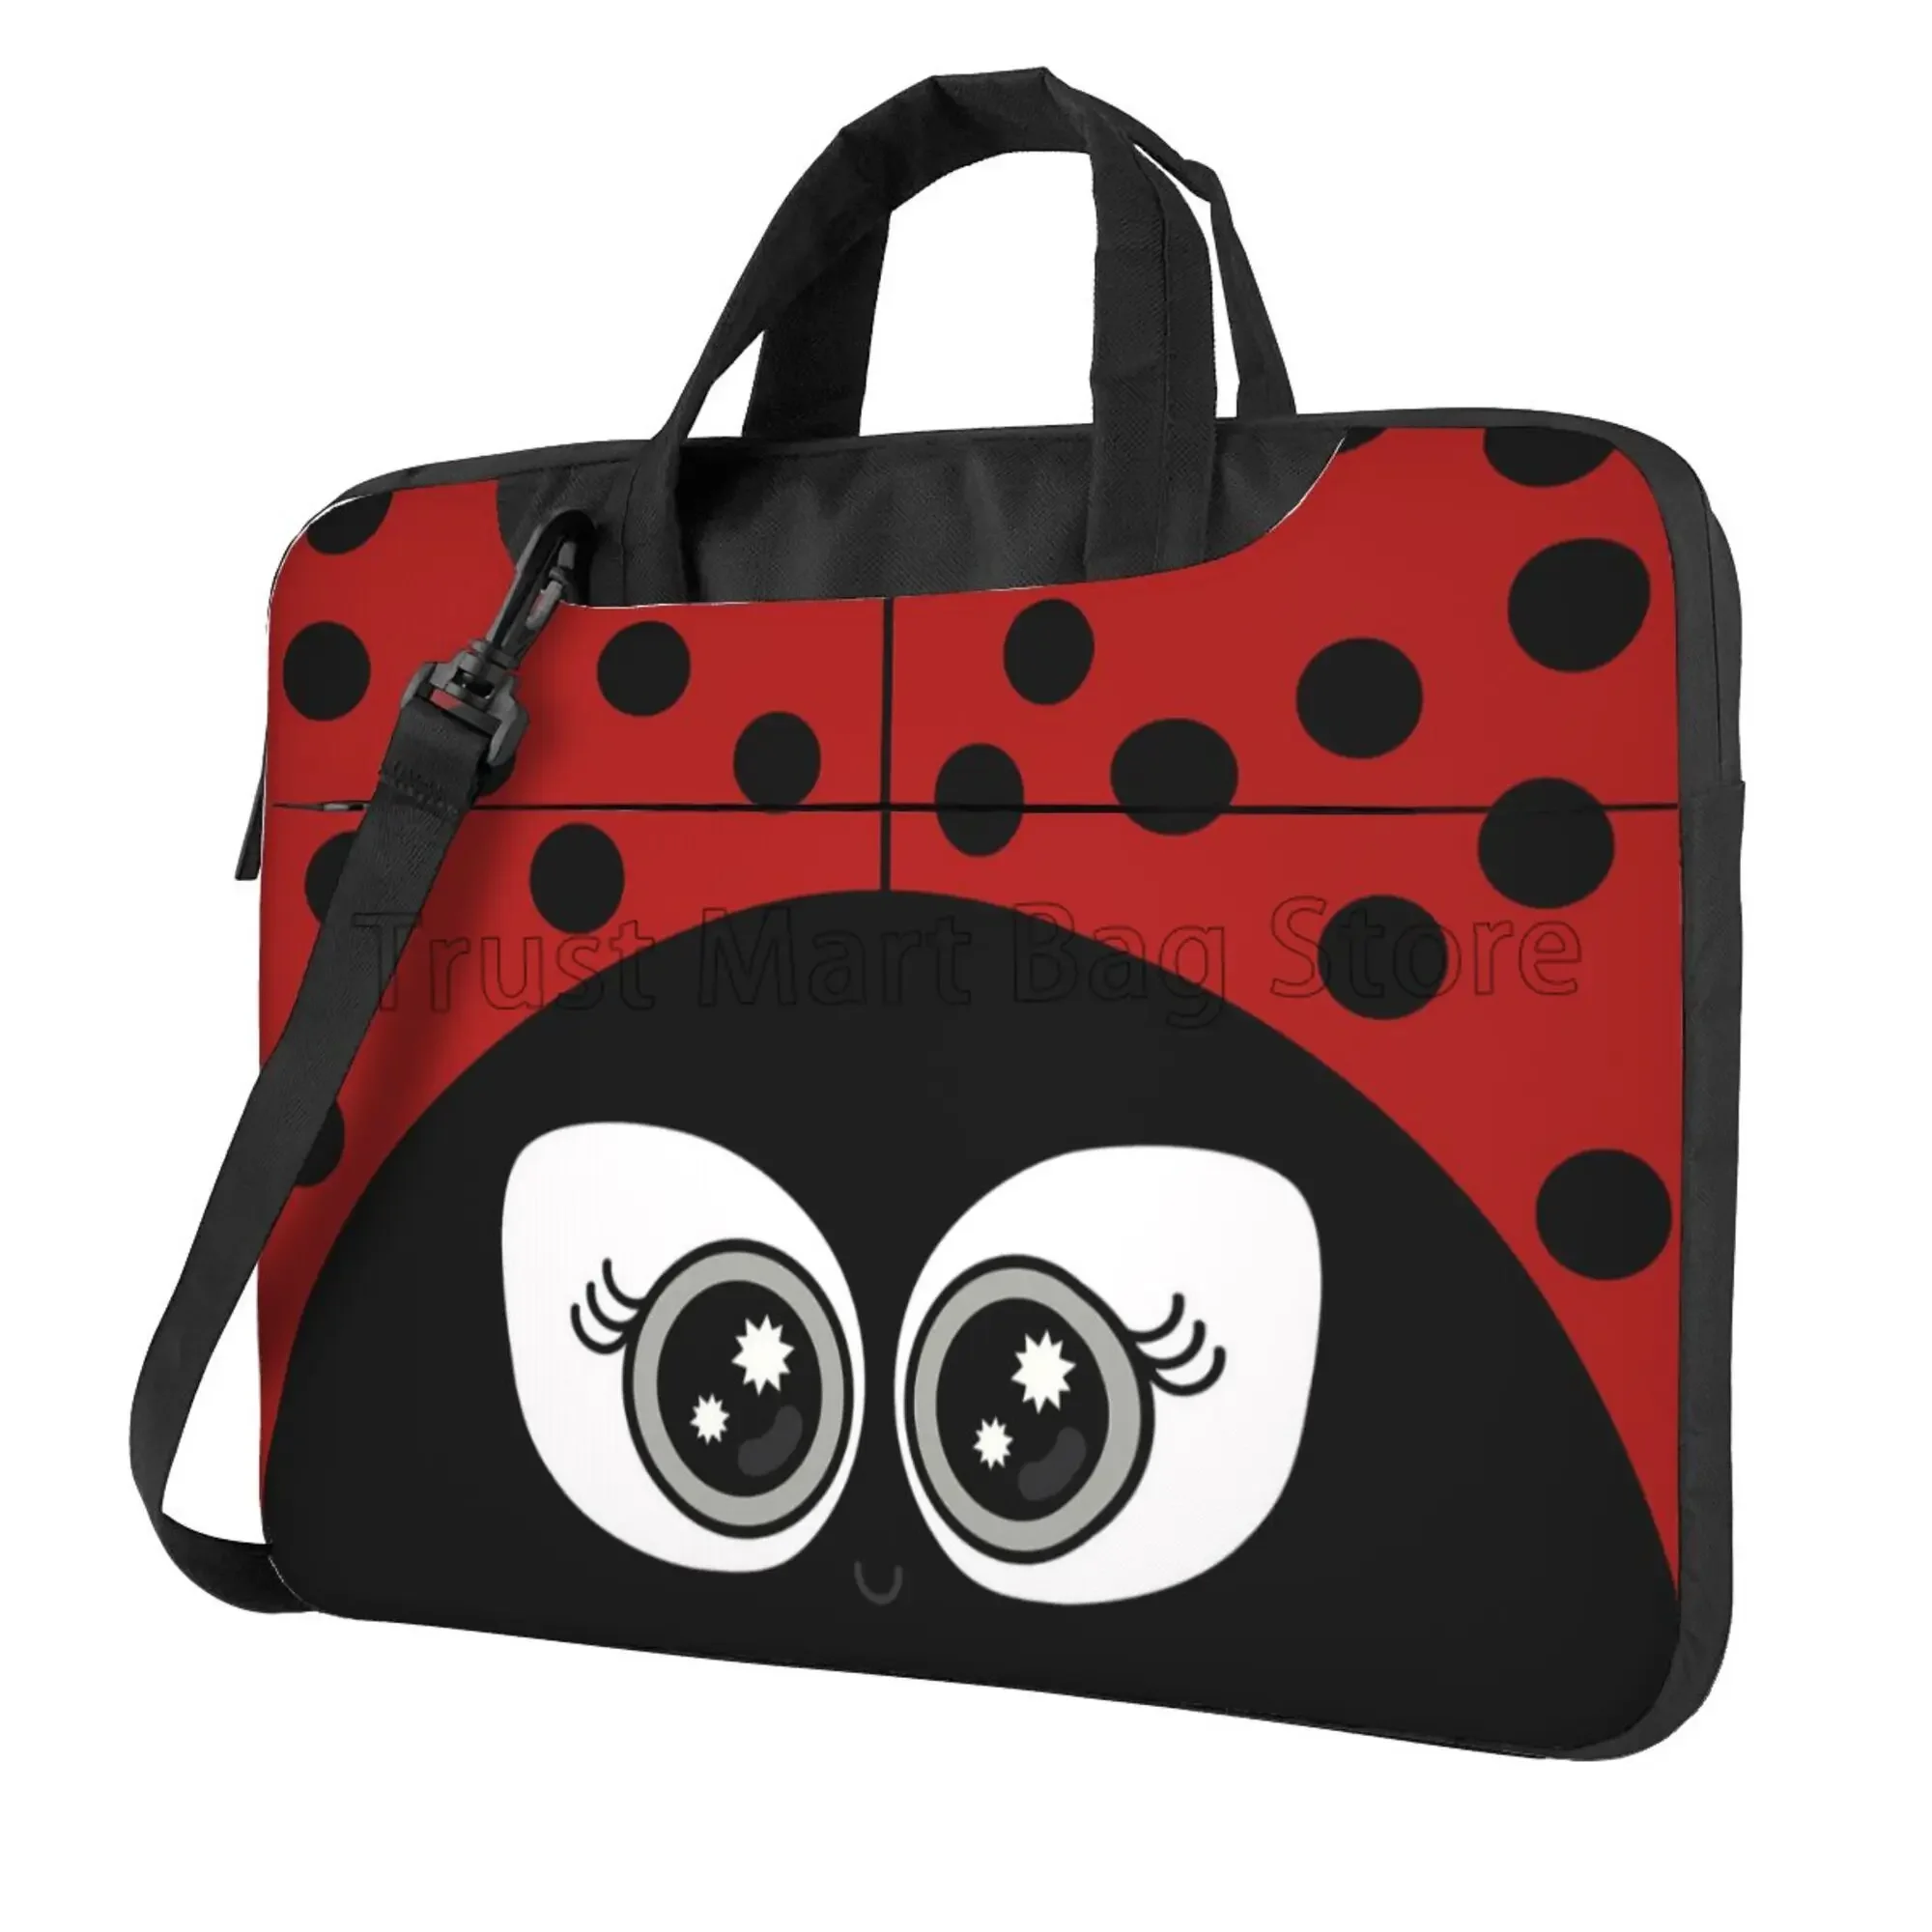 

Cute Cartoon Ladybug Pattern Laptop Shoulder Bag Carrying Case Computer PC Cover Pouch with Handle Fits 13/14/15.6 Inch Notebook